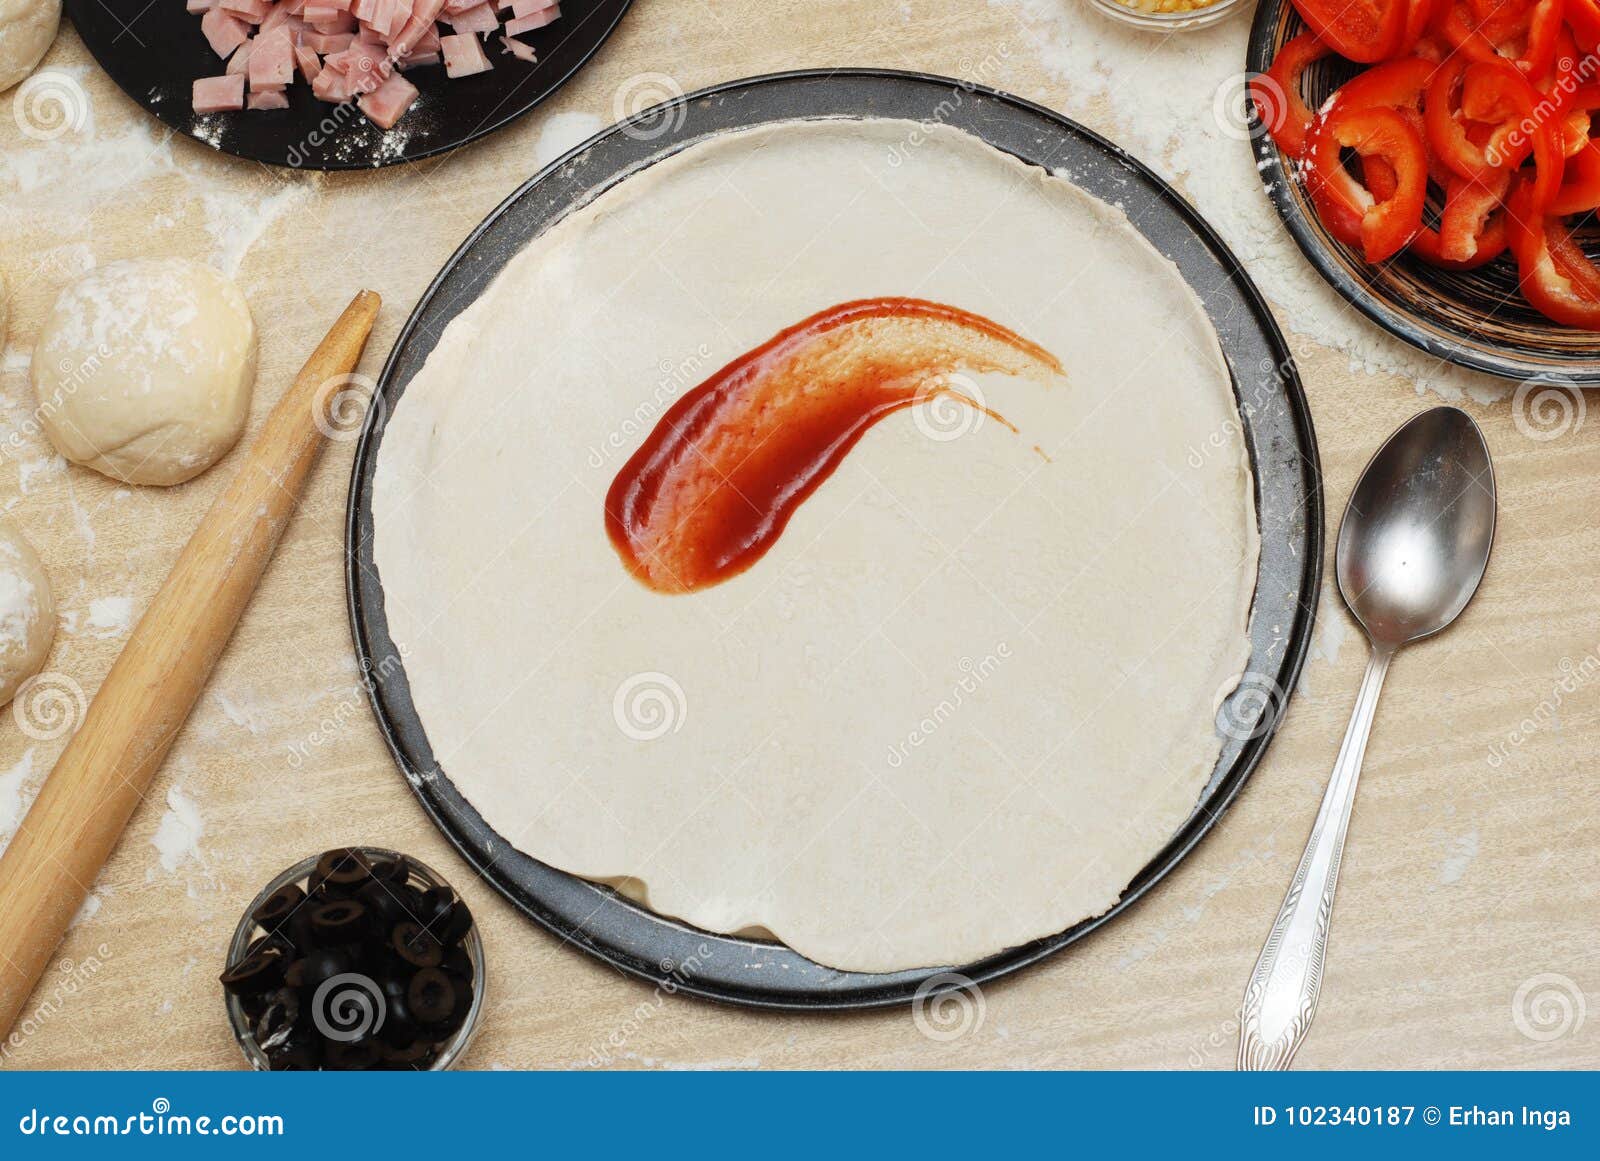 Raw Pizza Dough With Sauce And Ingredients On Wooden Table ...